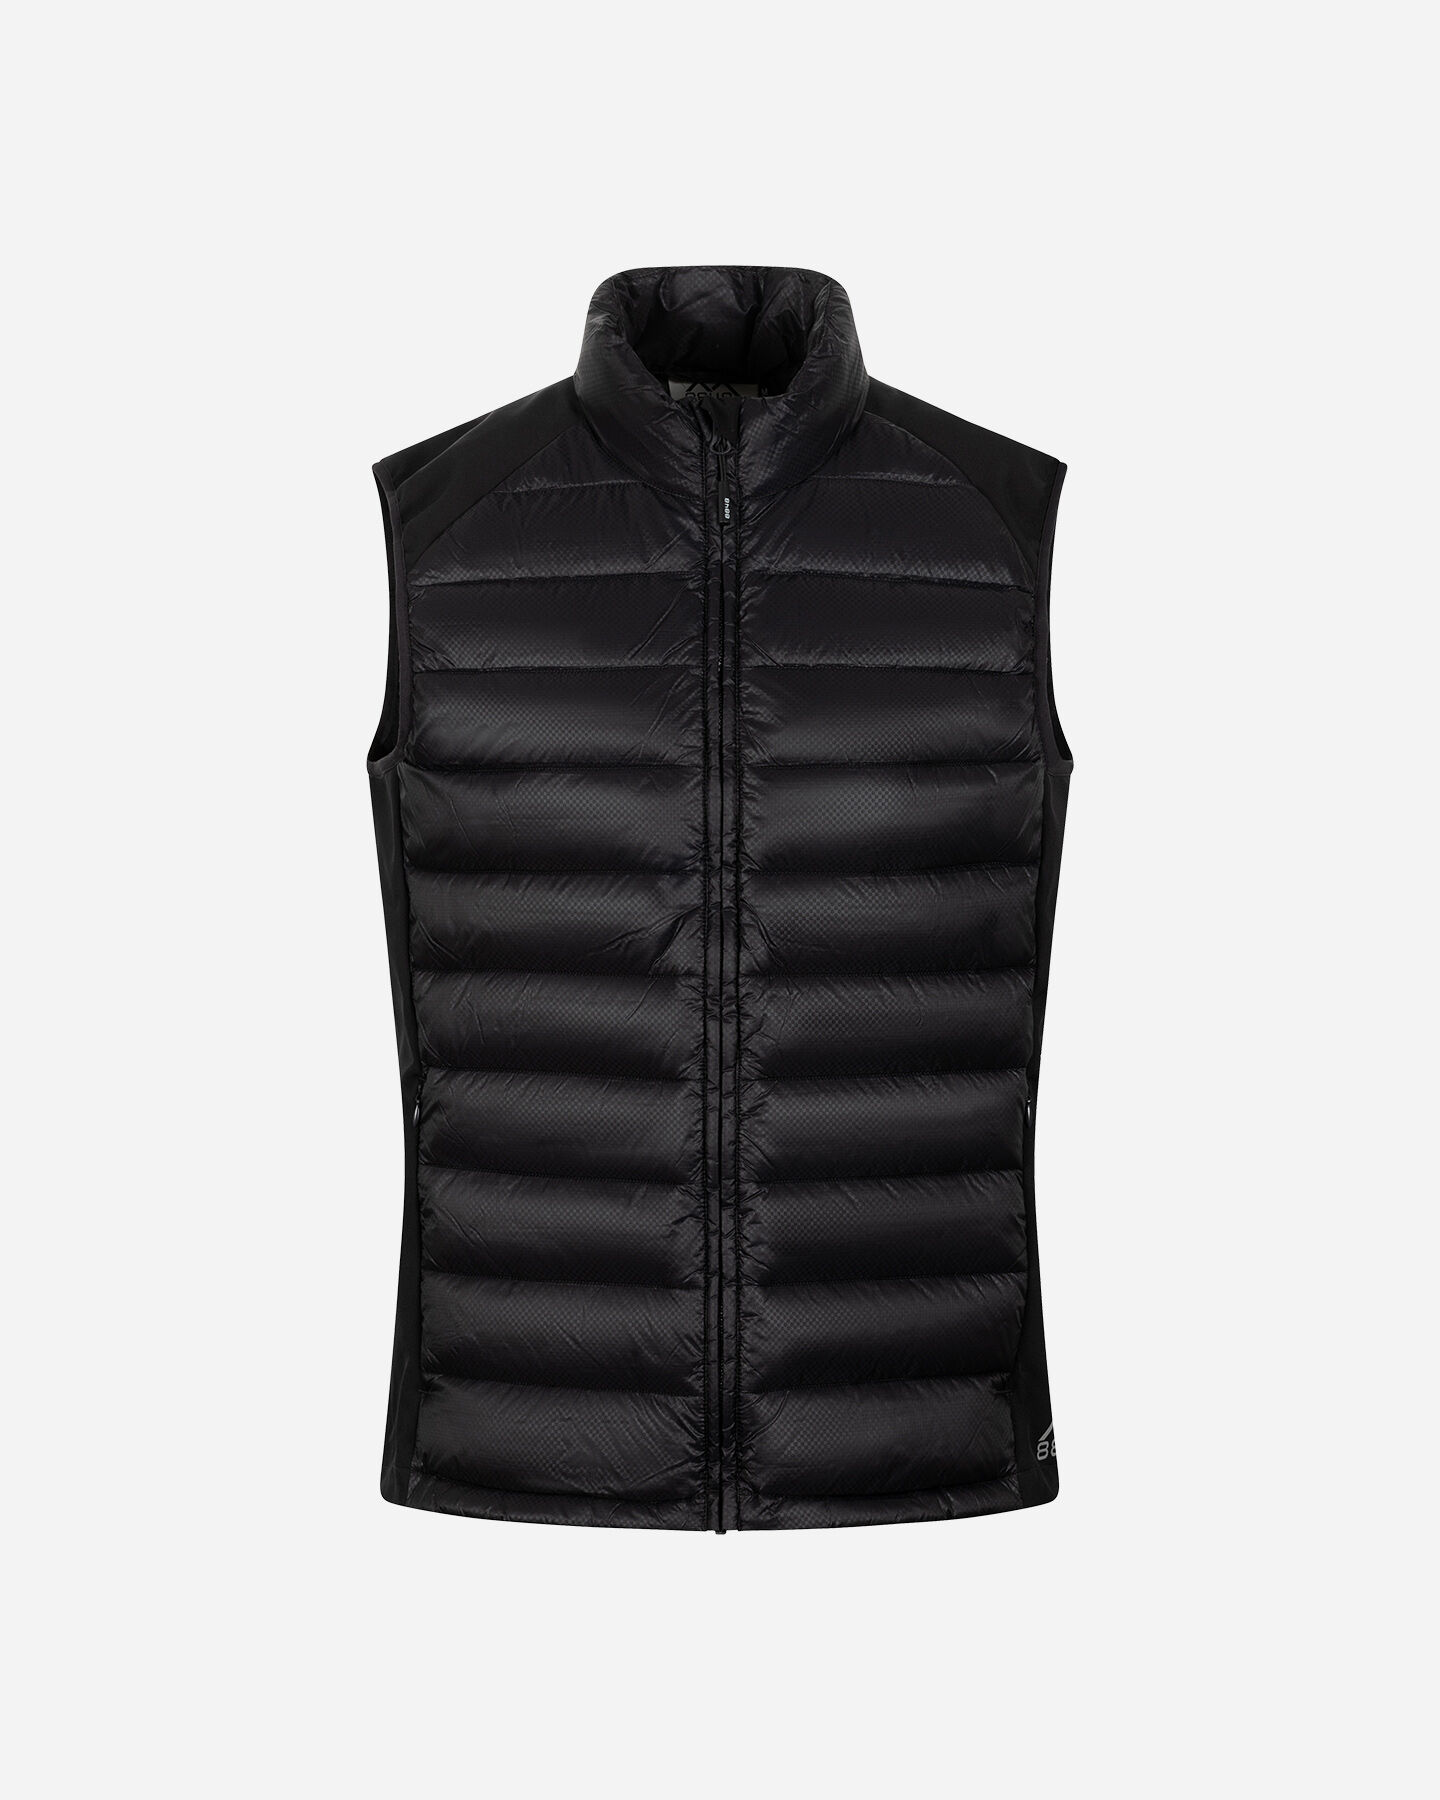  Gilet 8848 MOUNTAIN HIKE M S4131203|995|S scatto 0